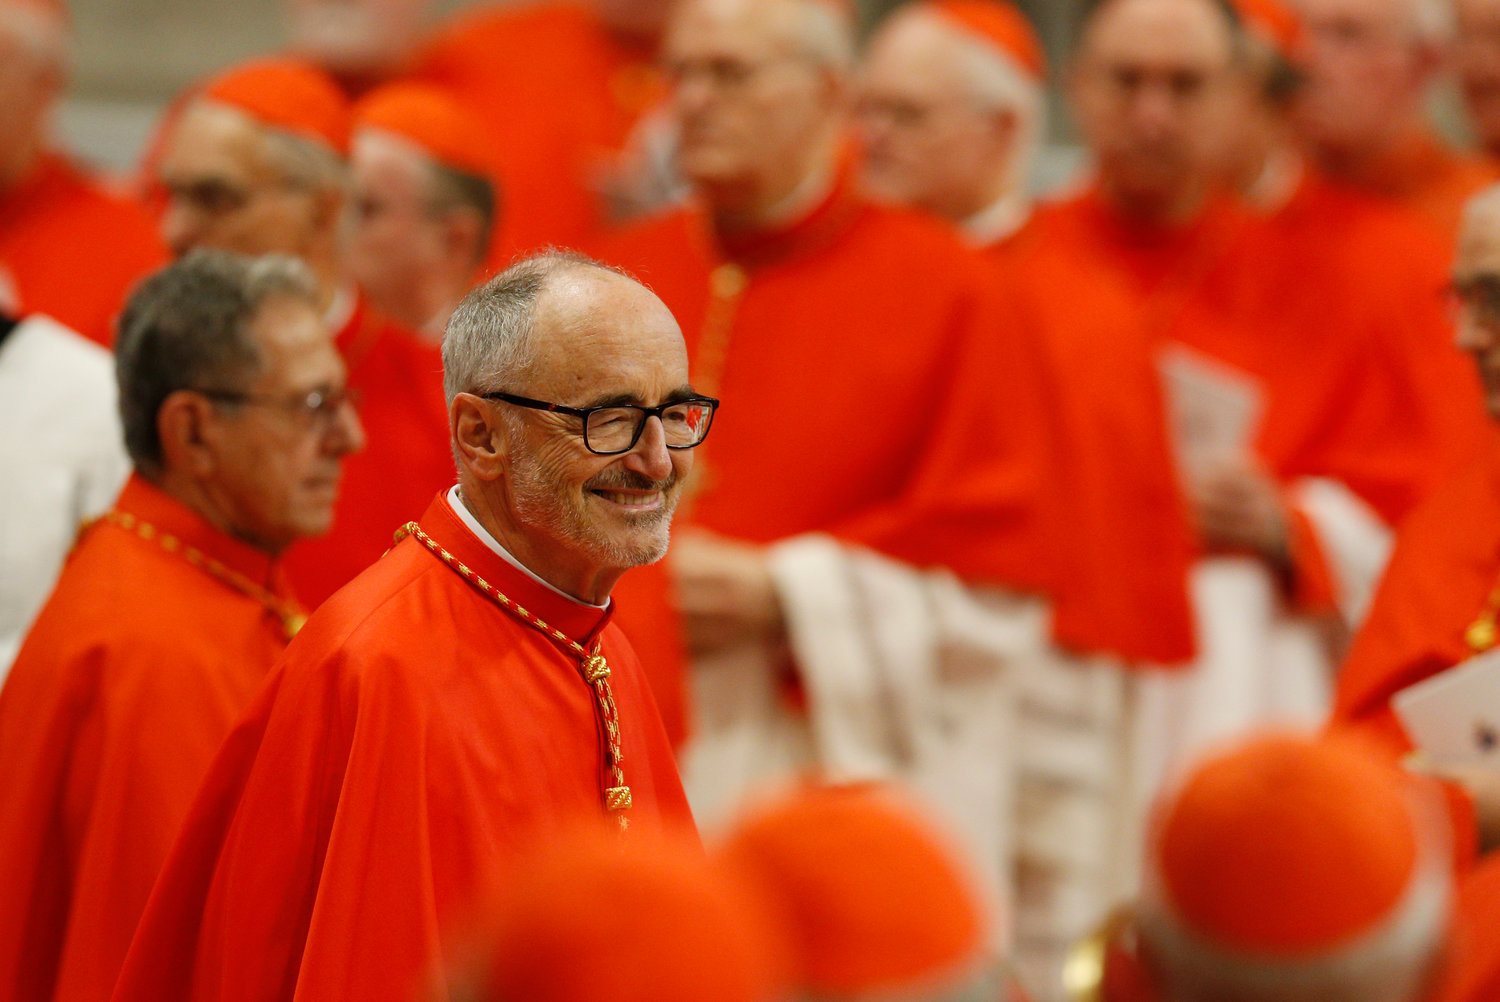 New Canadian Cardinal Michael Czerny arrives for a consistory led by Pope Francis for the creation of 13 new cardinals in St. Peter's Basilica at the Vatican Oct. 5, 2019.